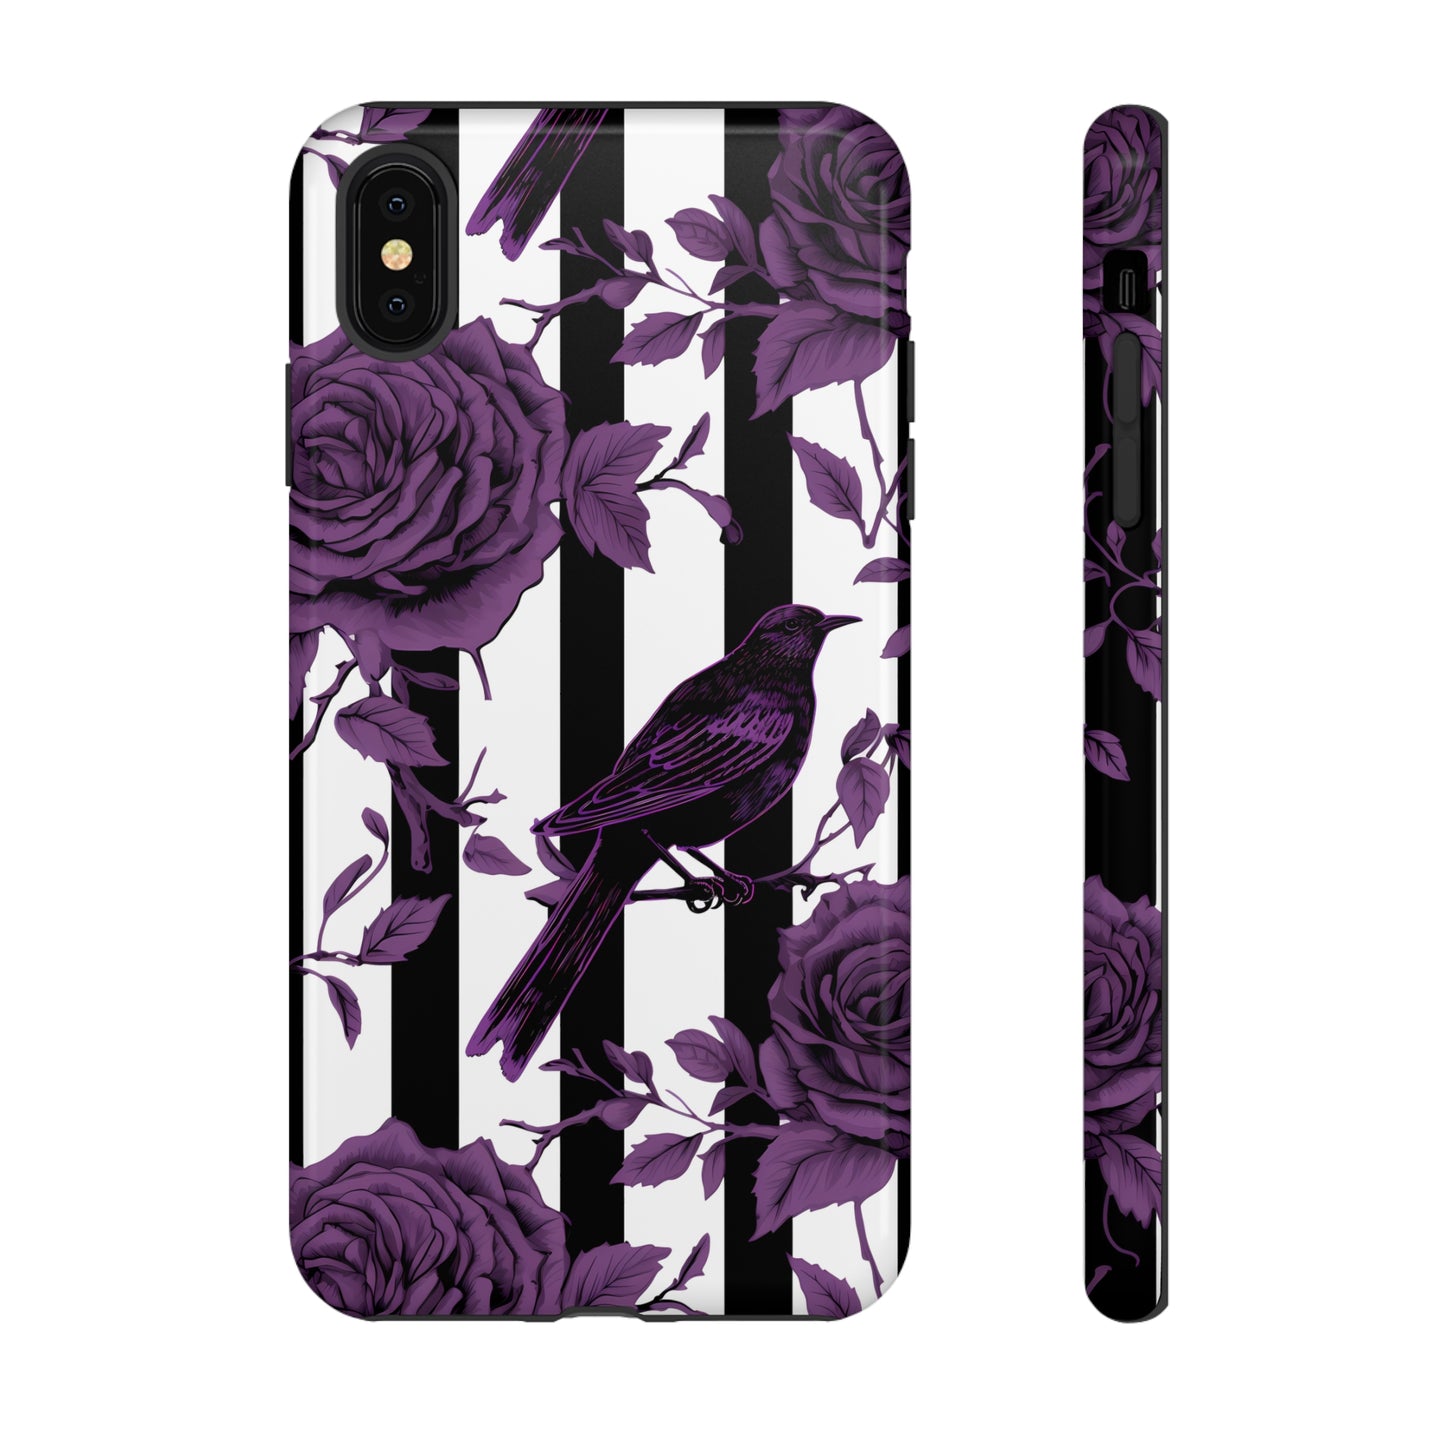 Striped Crows and Roses Tough Cases for iPhone Samsung Google PhonesPhone CaseVTZdesignsiPhone XS MAXGlossyAccessoriescrowsGlossy